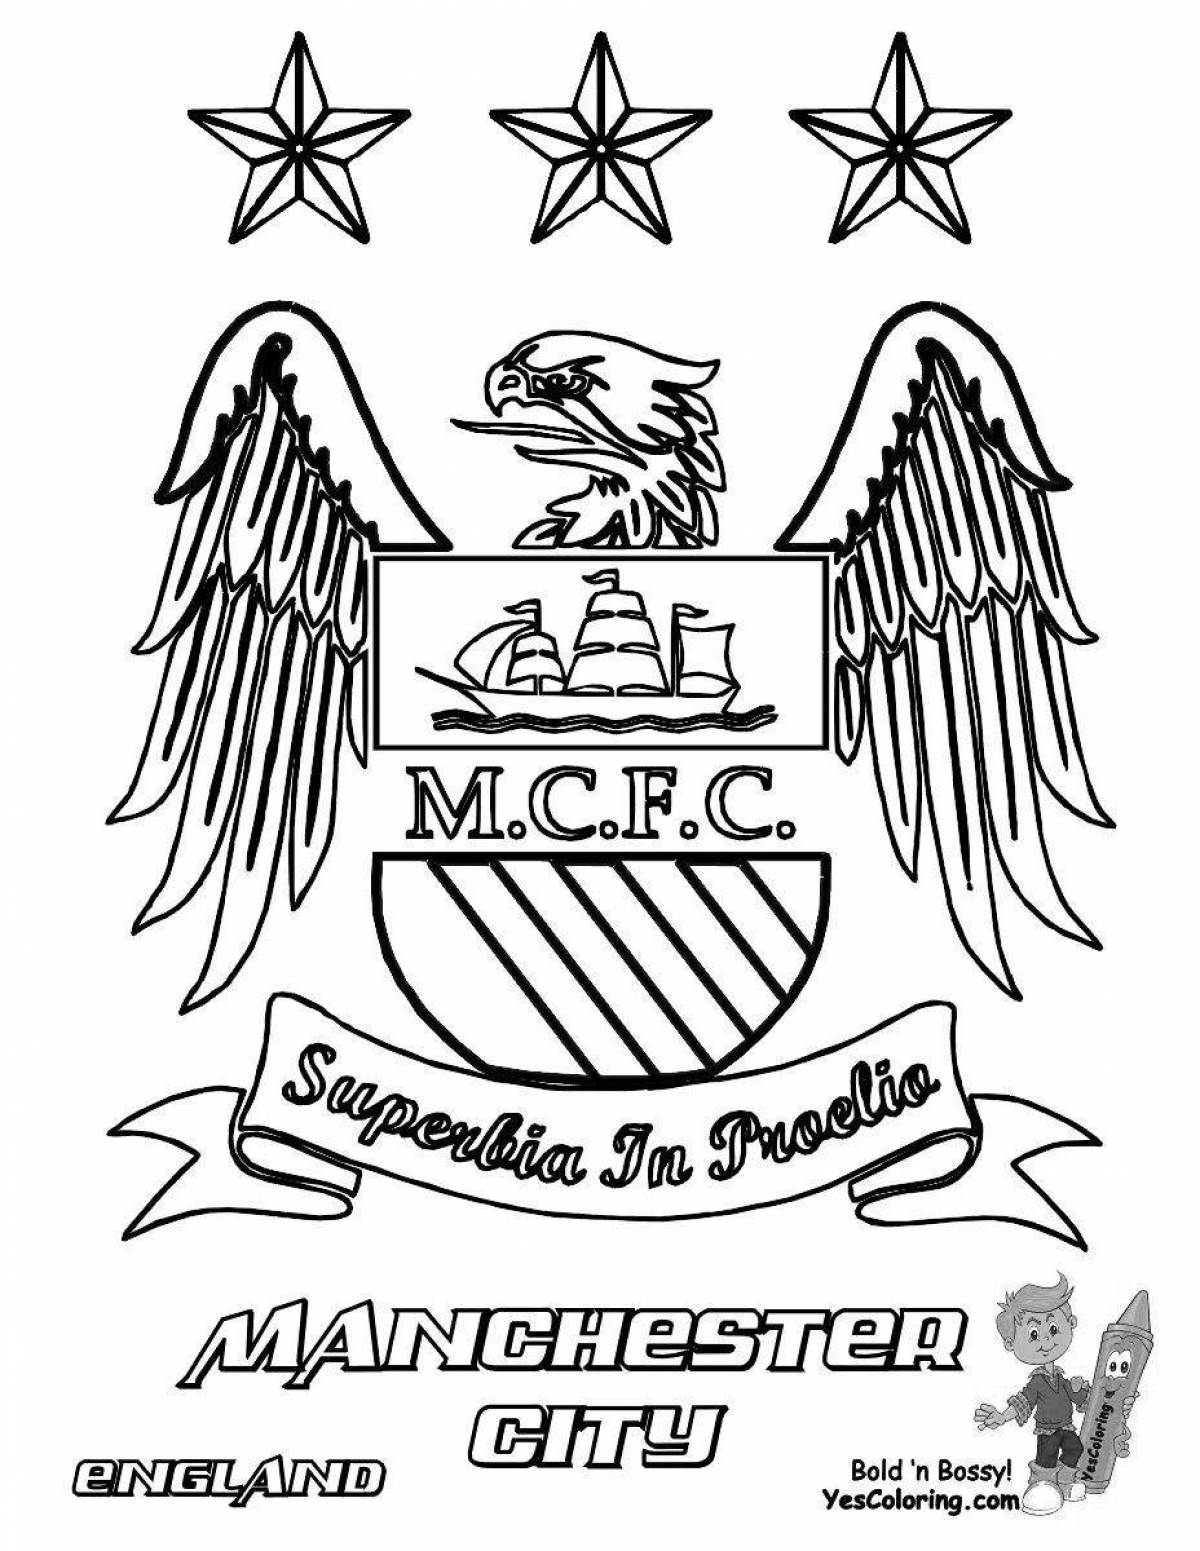 Brilliant manchester city coloring page